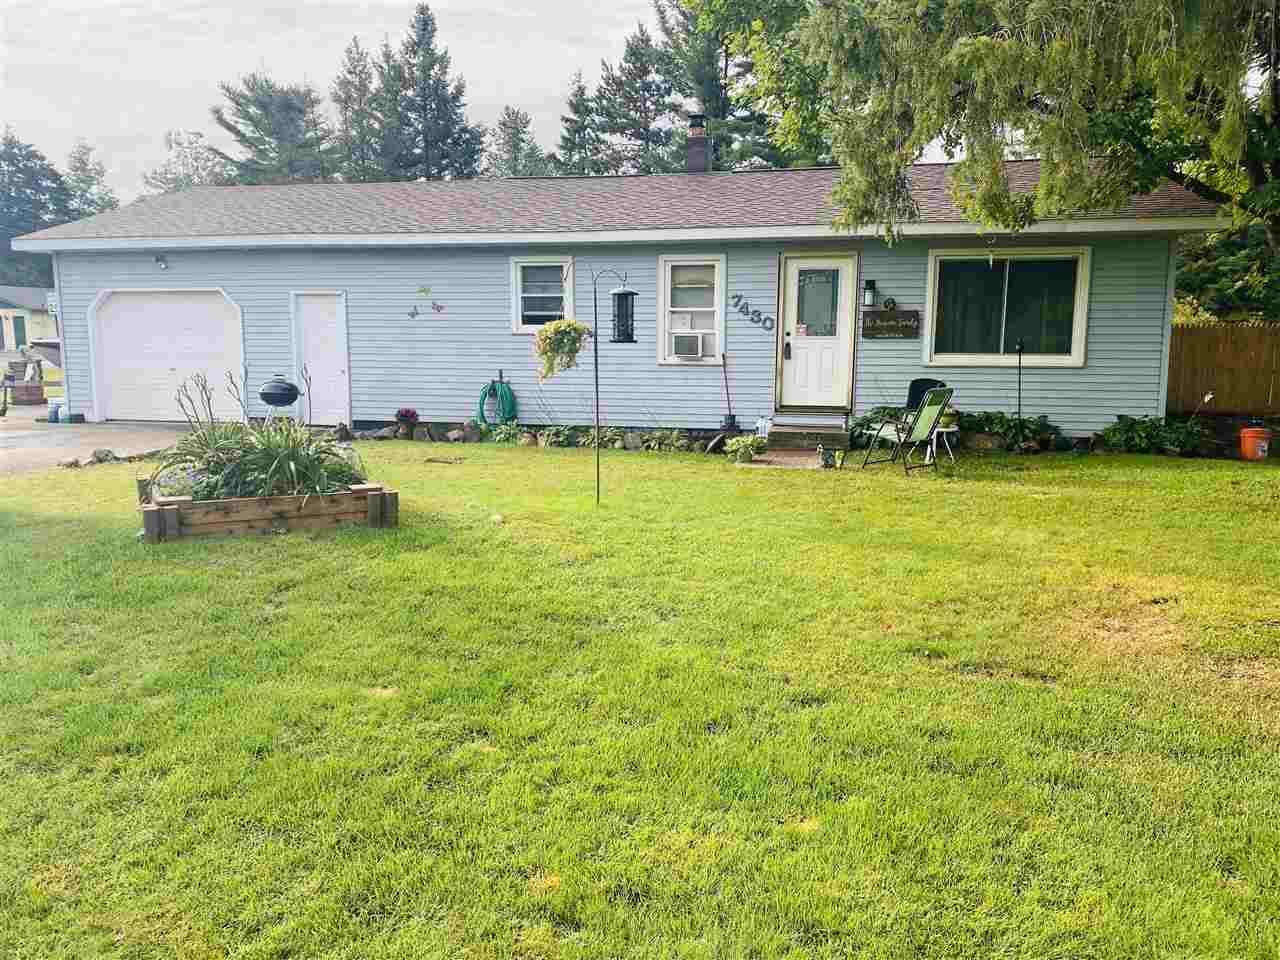 7430 South Park Road, Wisconsin Rapids, WI 54494